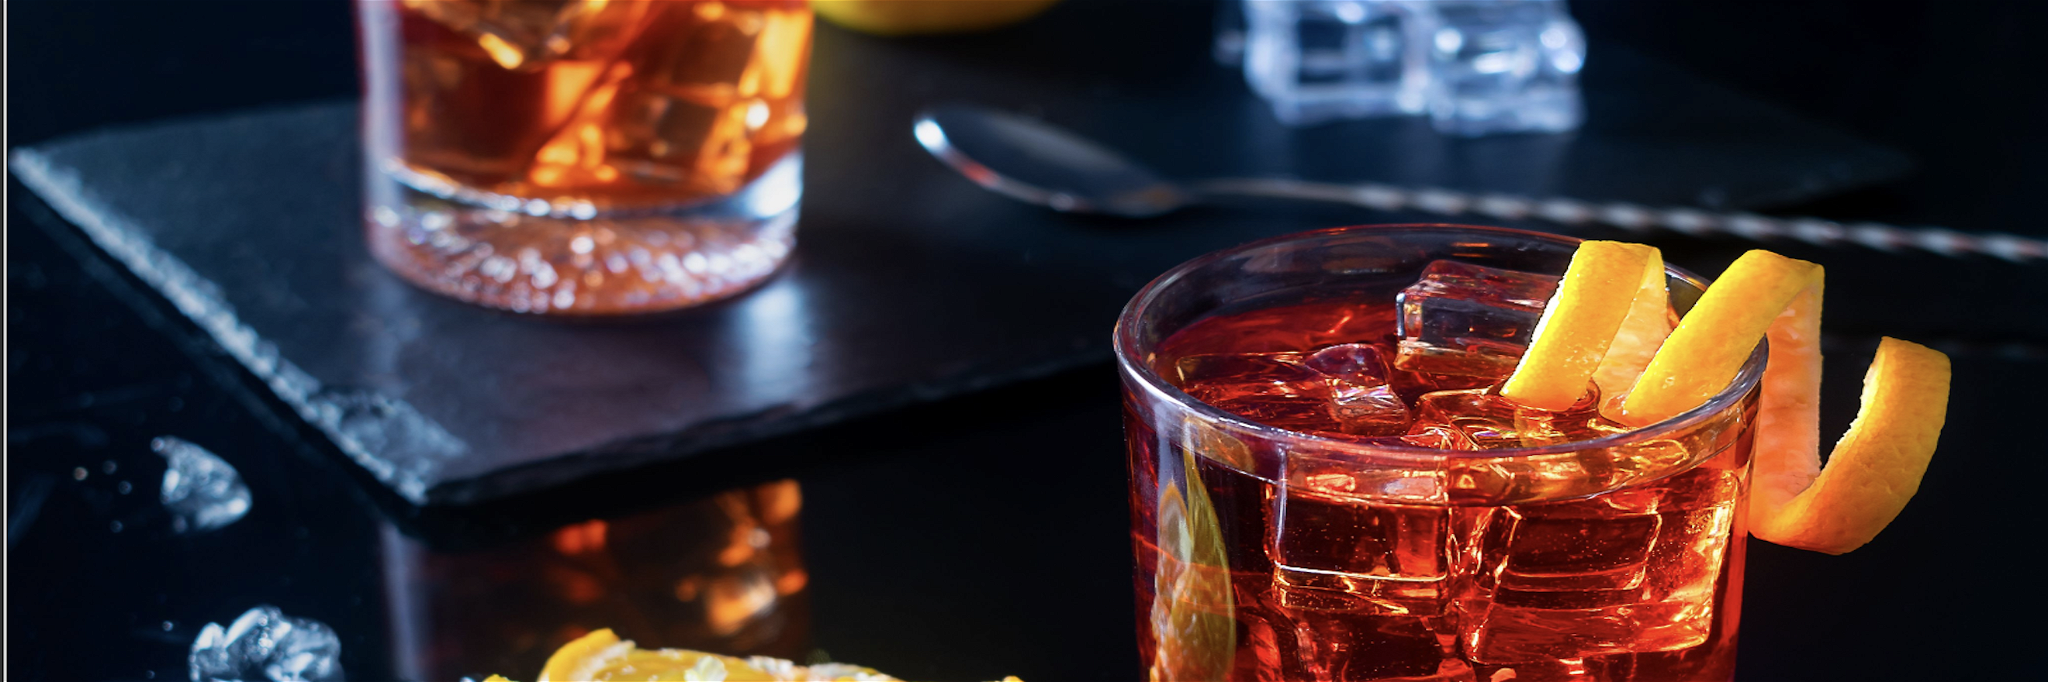 Negroni&nbsp;is the classic three-ingredient&nbsp;cocktail that contains&nbsp;gin, sweet vermouth and Campari.&nbsp;